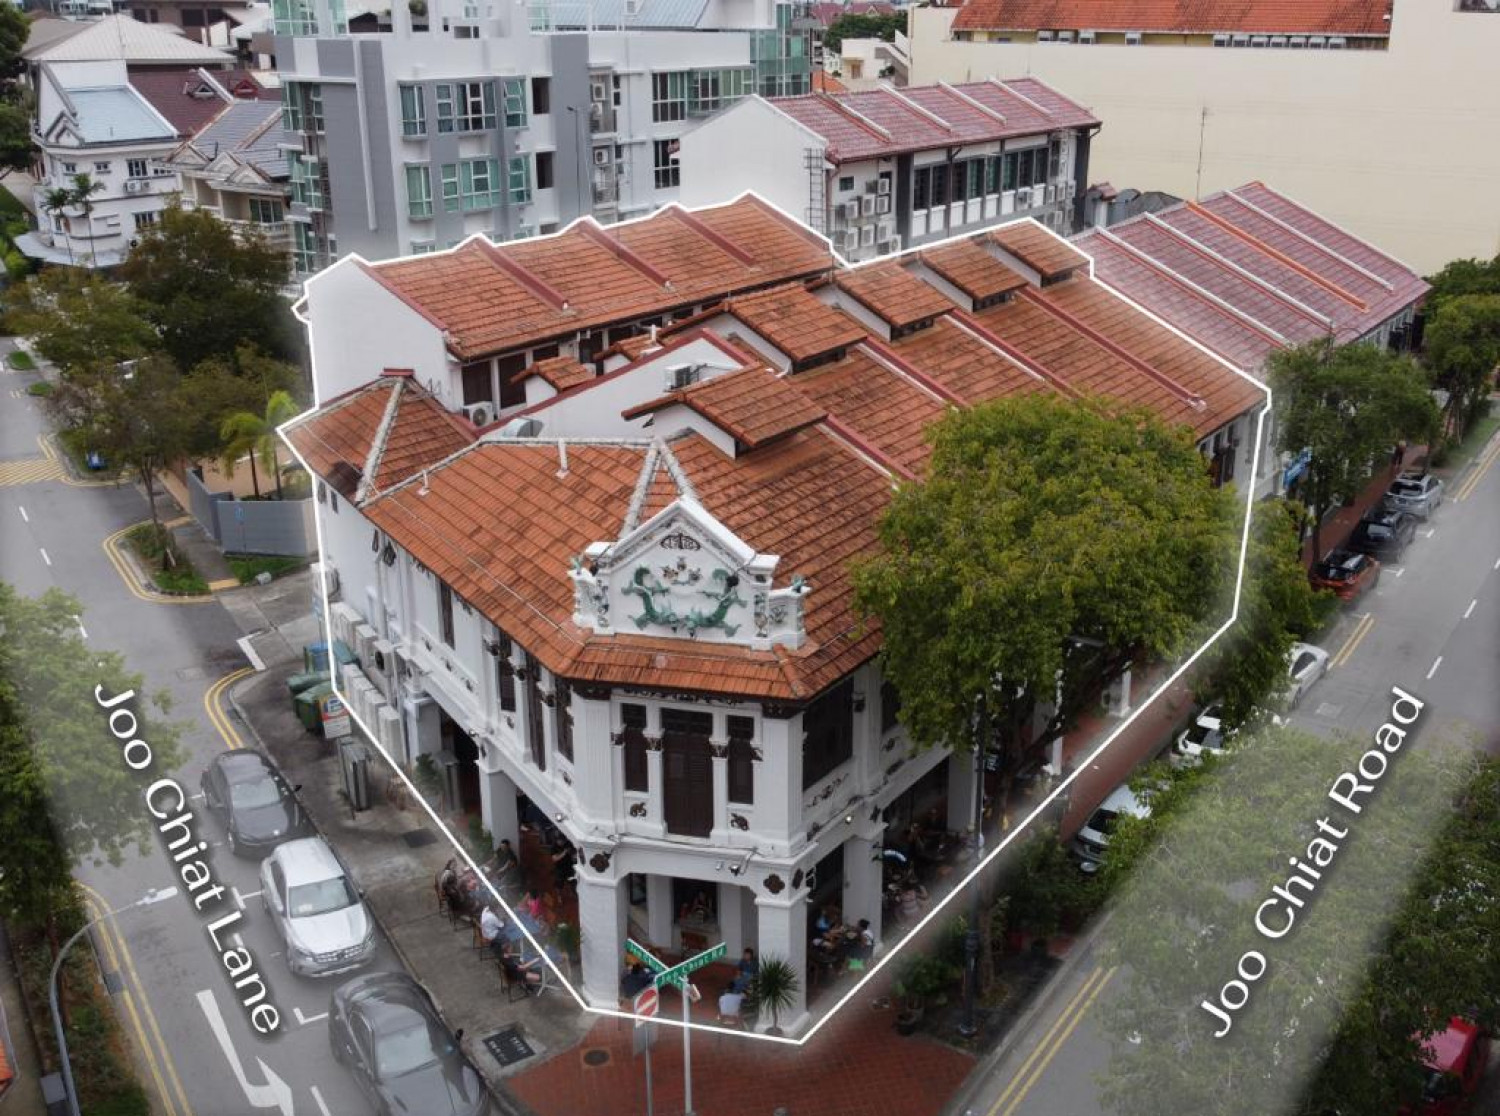 Five adjoining shophouses along Joo Chiat Road for sale at $62 mil - Property News